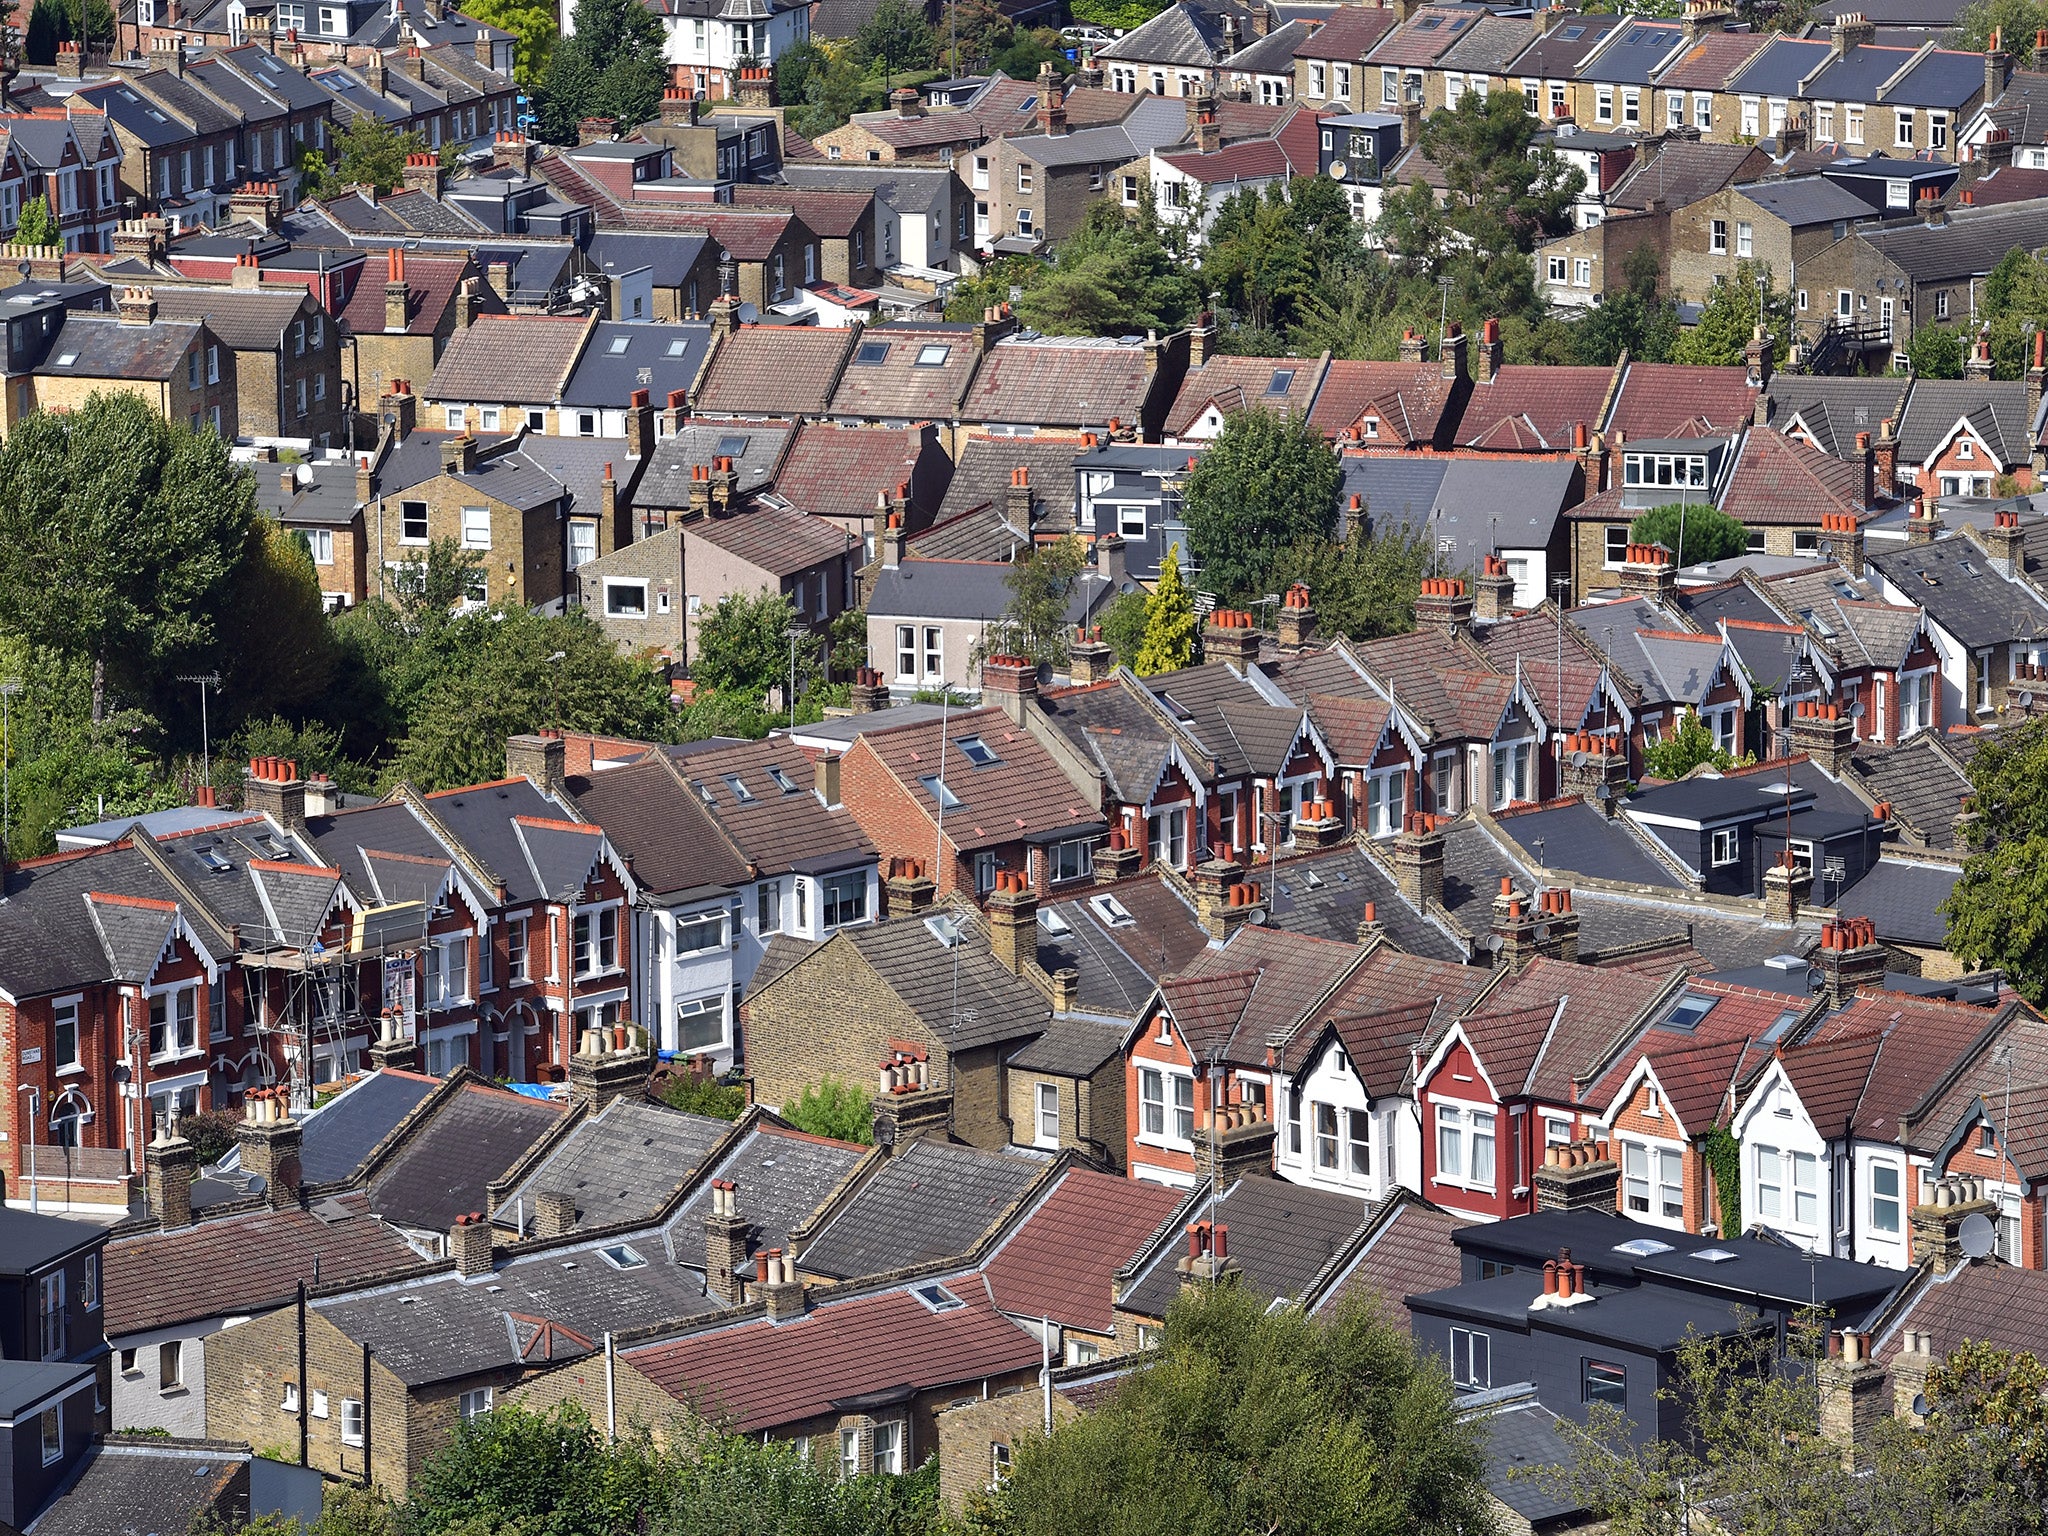 The UK’s home ownership rate for those aged 25-34 fell from 59 per cent in 2002 to 37 per cent by 2014